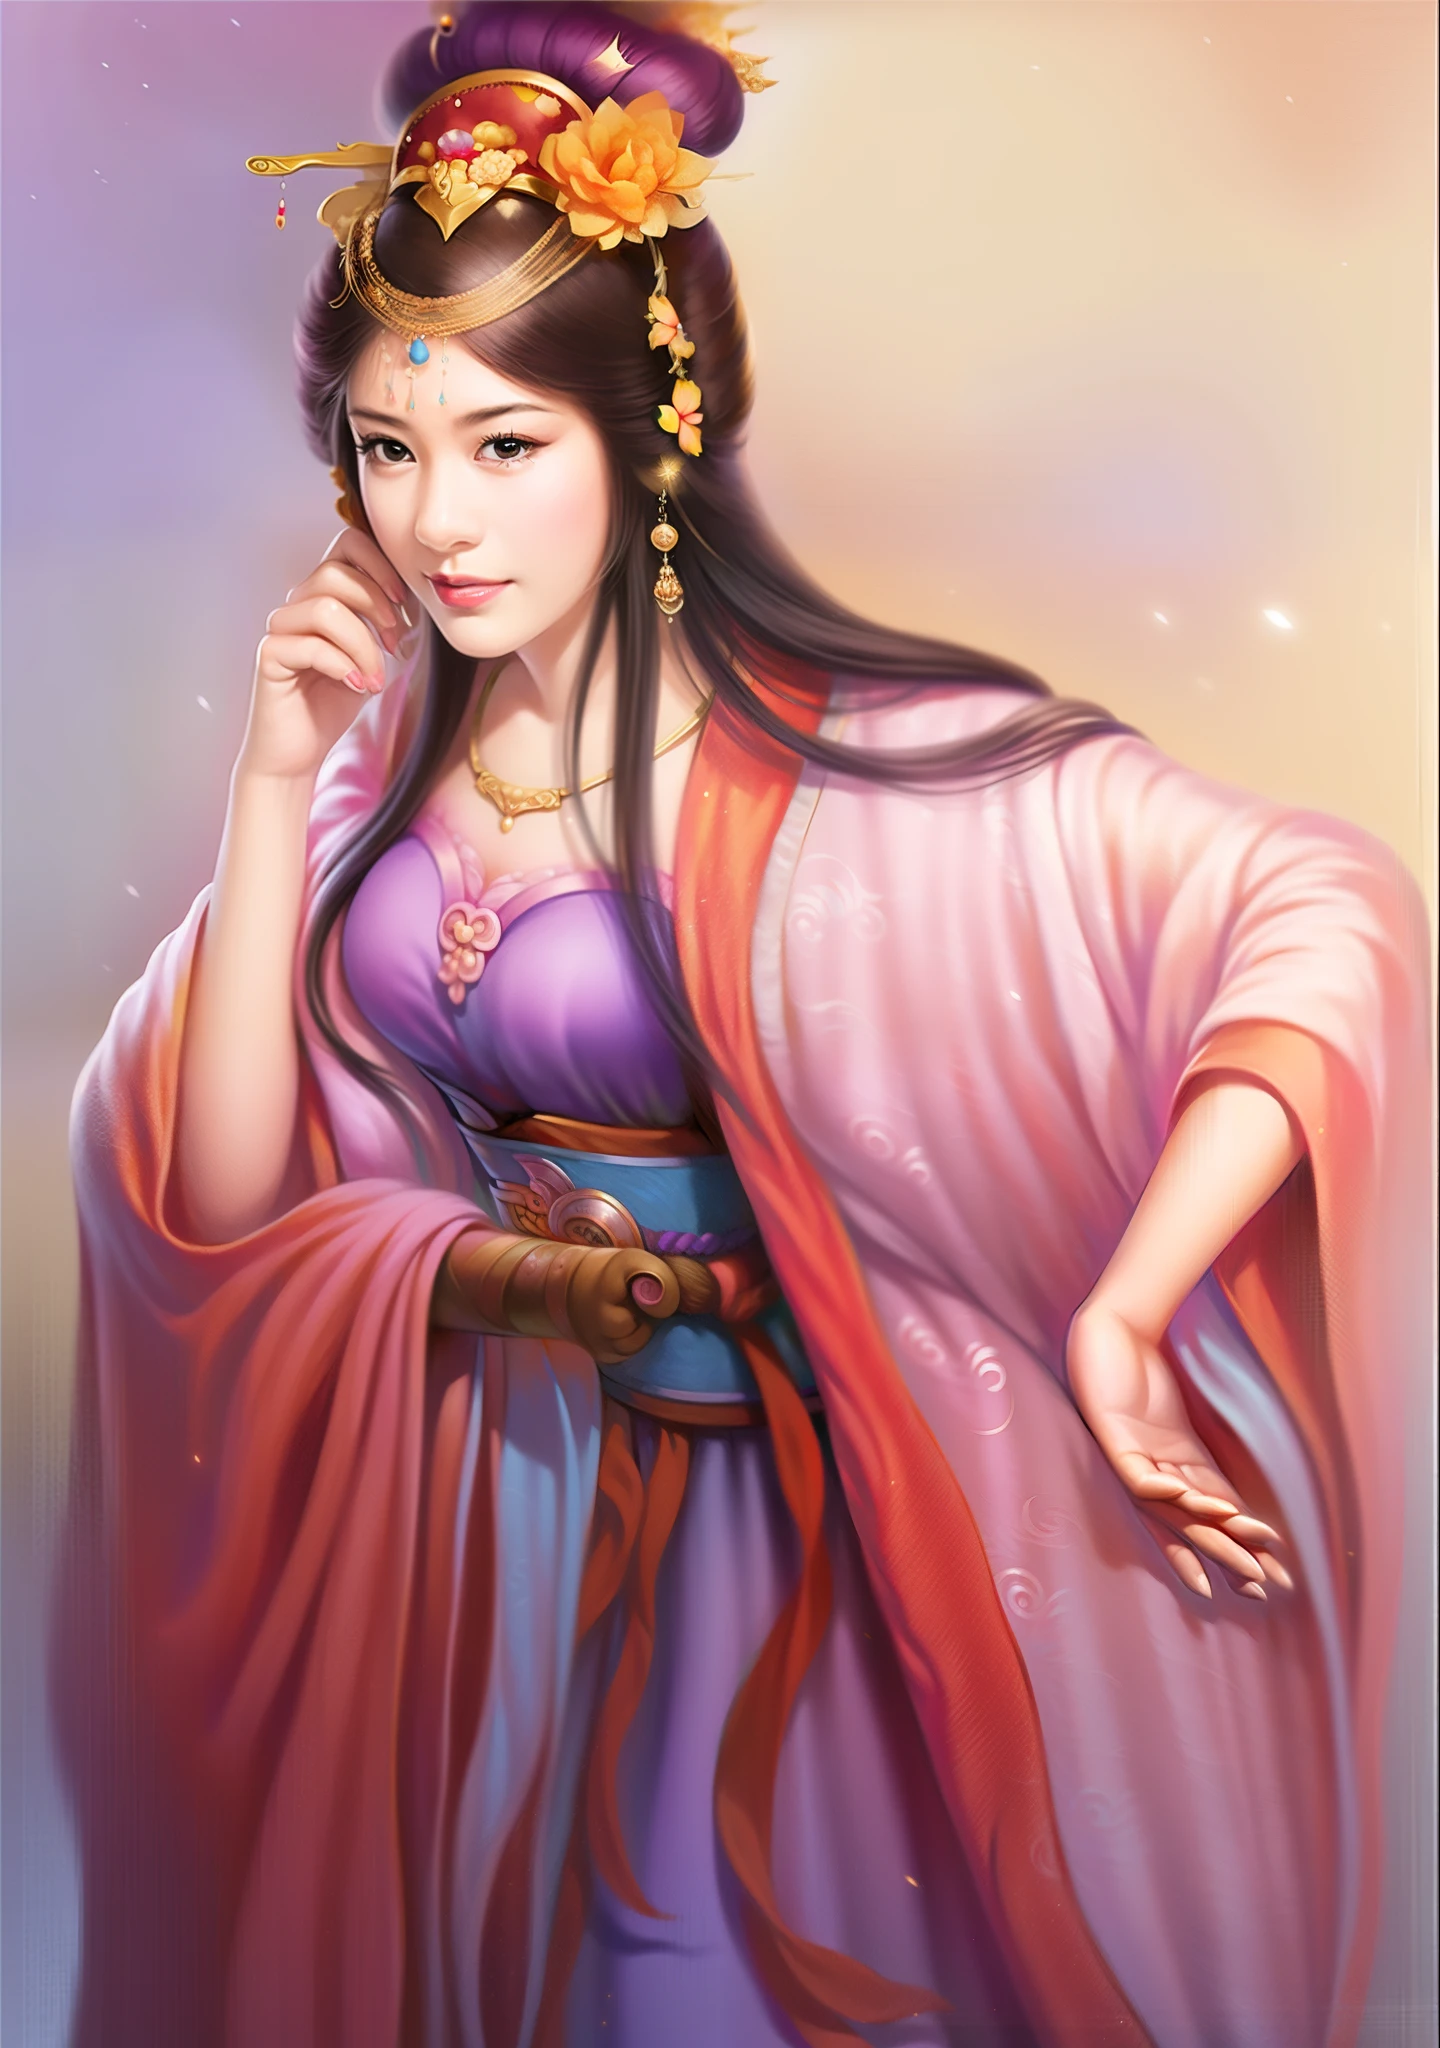 woman wearing purple dress and golden crown, beautiful fantasy queen, beautiful figure painting, ((beautiful fantasy queen)), ancient chinese princess, Inspired by Du Qiong, Inspired by Lan Ying, by Qu Leilei, author：Yang Jie, chinese princess, Inspired by Zhu Lian, Inspired by Qiu Ying, author：Fan Qi, inspired by trees